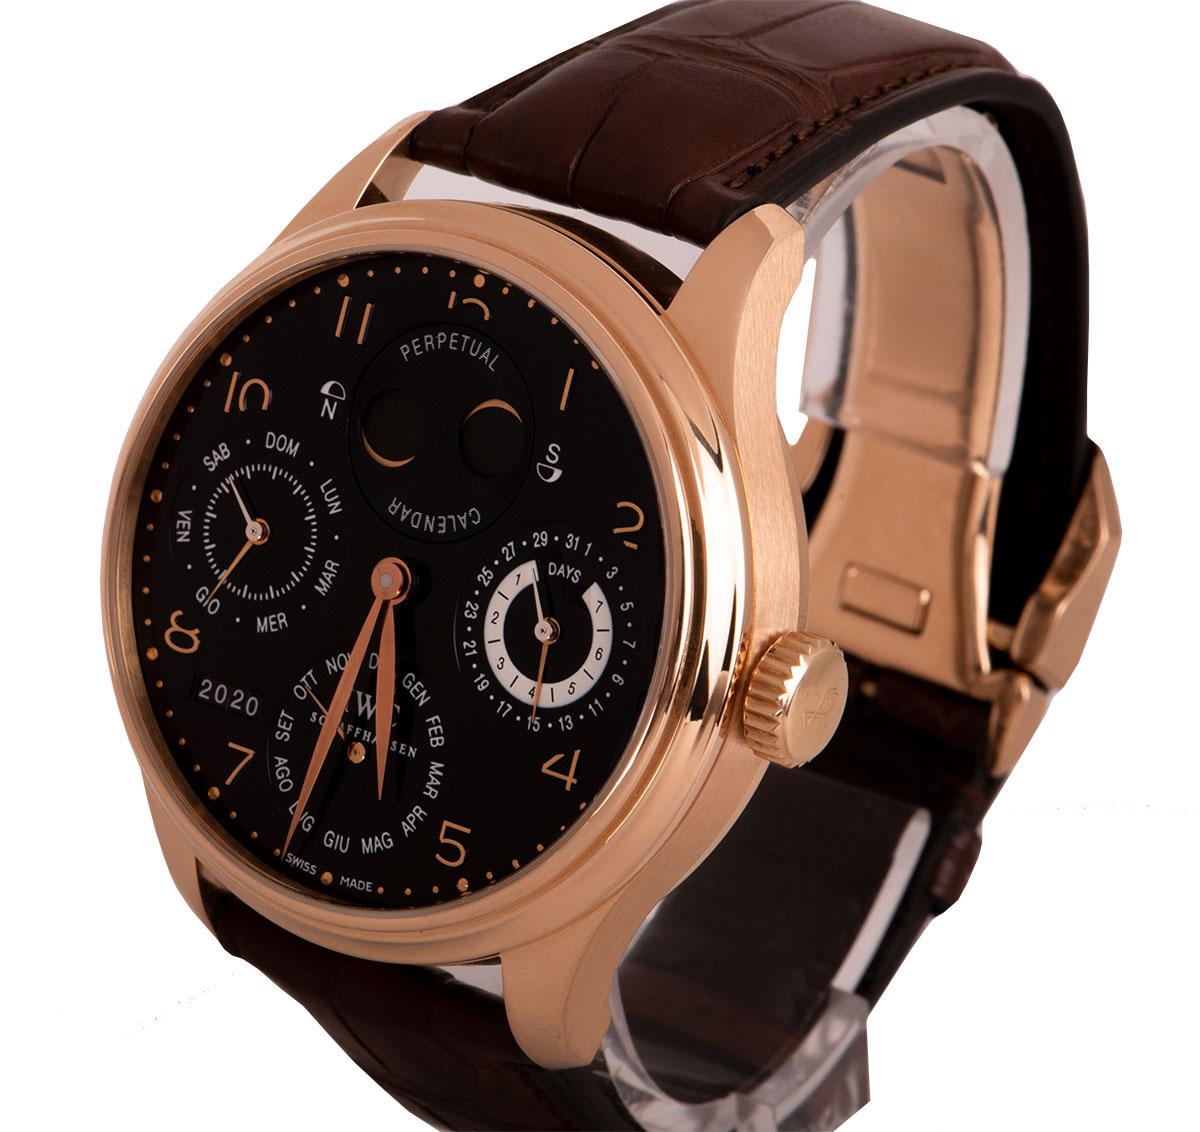 A 44 mm 18k Rose Gold Portugieser Perpetual Calendar Gents Wristwatch, black dial with applied arabic numbers, date and 7 day power reserve indicator at 3 0'clock, month sub-dial at 6 0'clock, year aperture between 7 and 8 0'clock, small seconds and